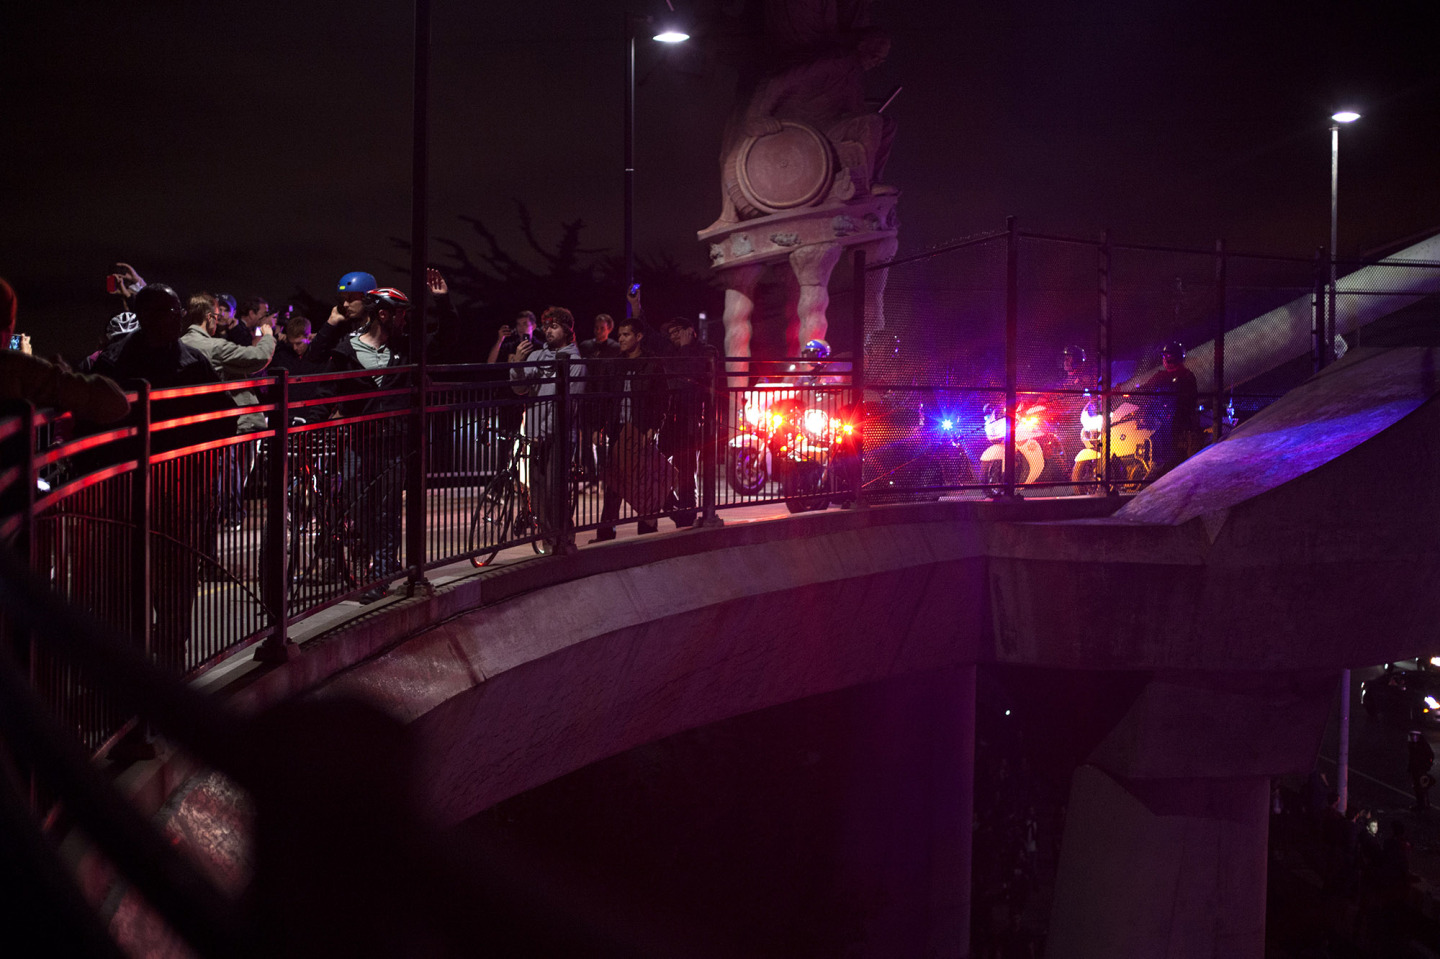 Stand off between protesters and police on I-80 pedestrian overpass. (Mark Andrew Boyer)